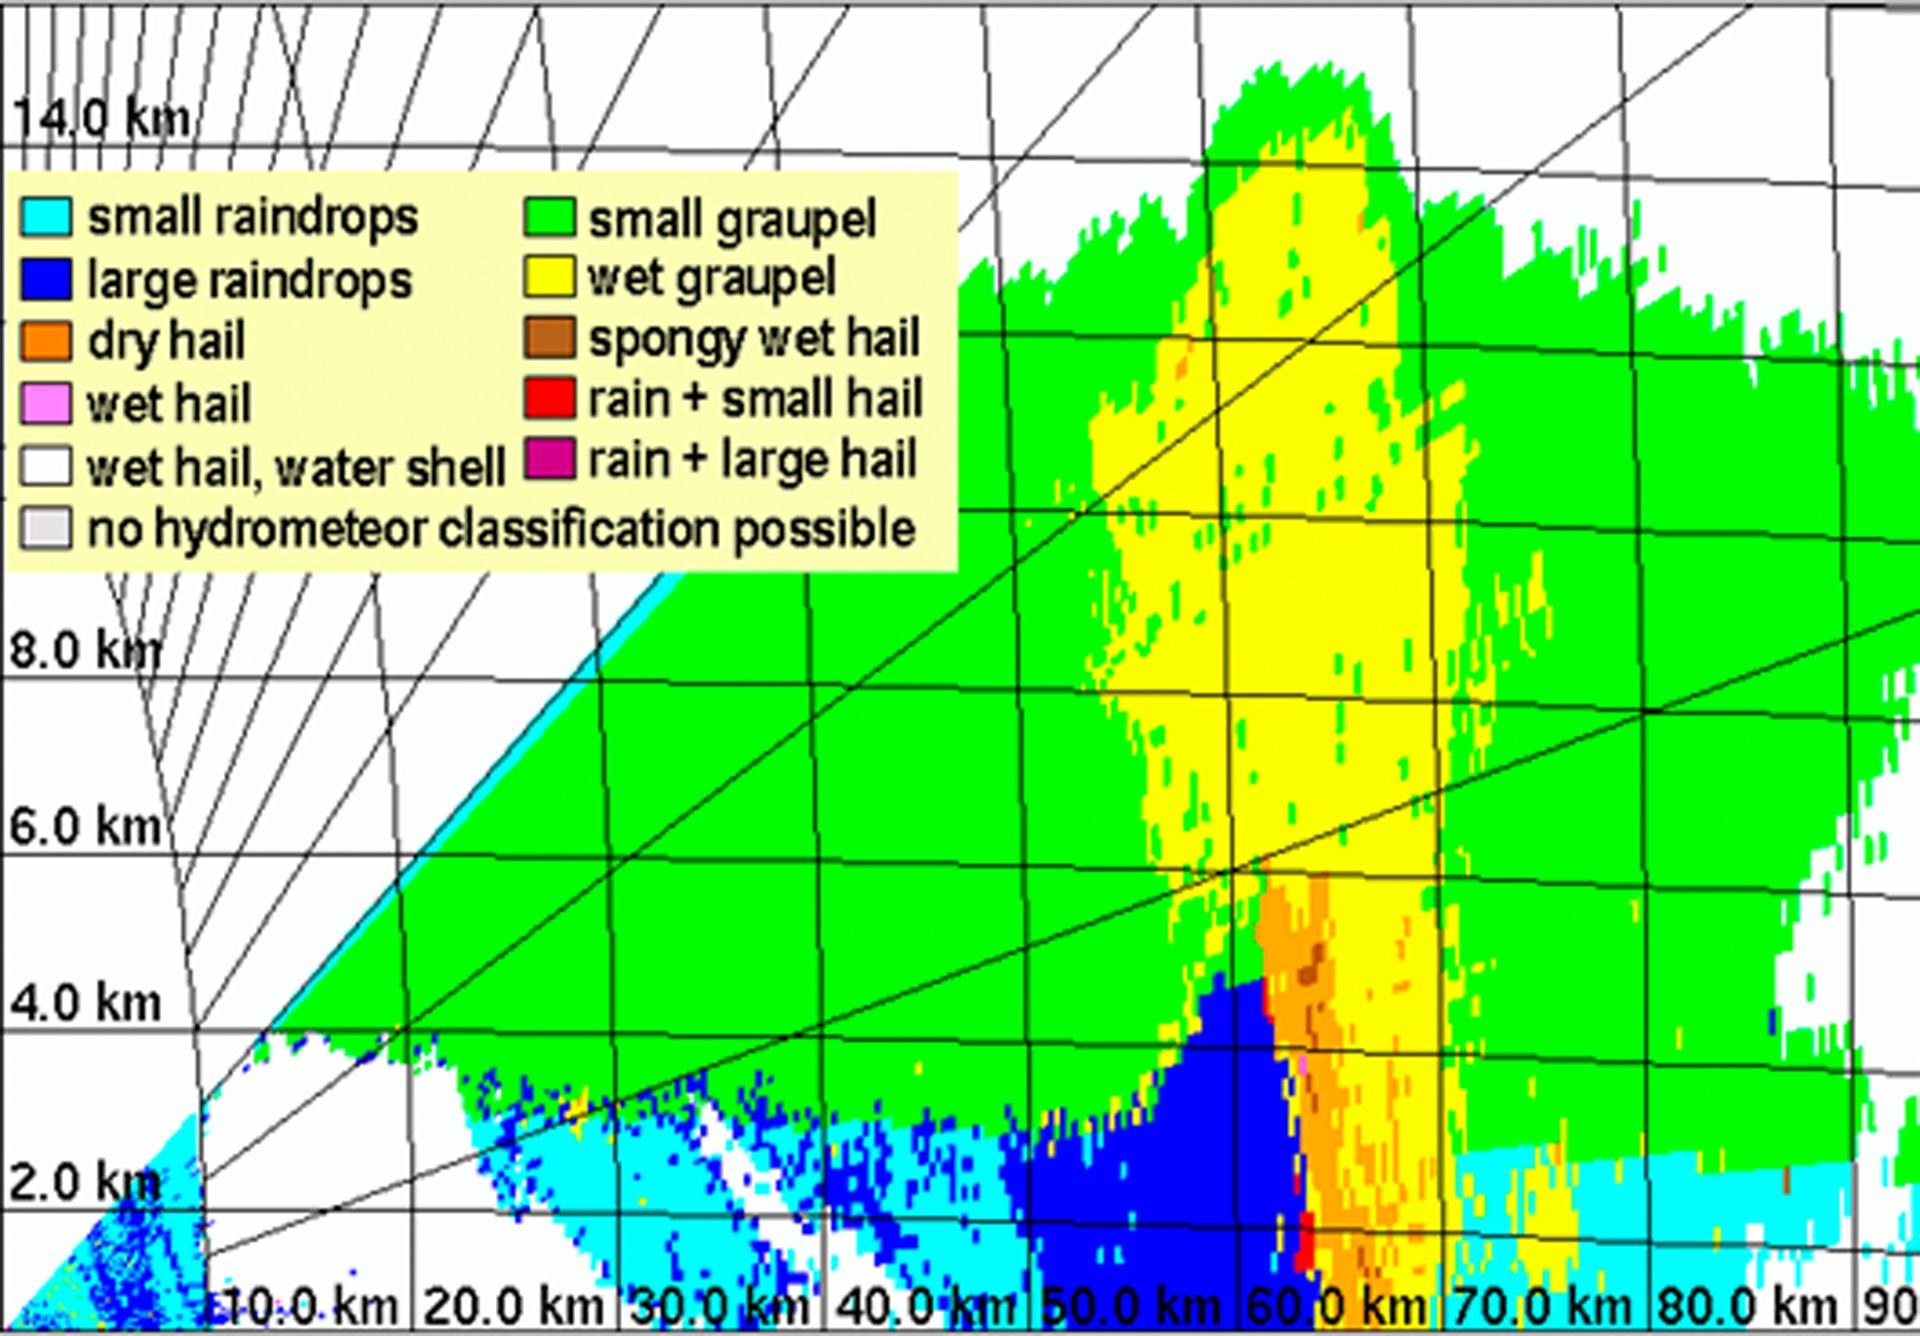 Vertical section through a thunderstorm with the precipitation type derived from polarimetric measurements